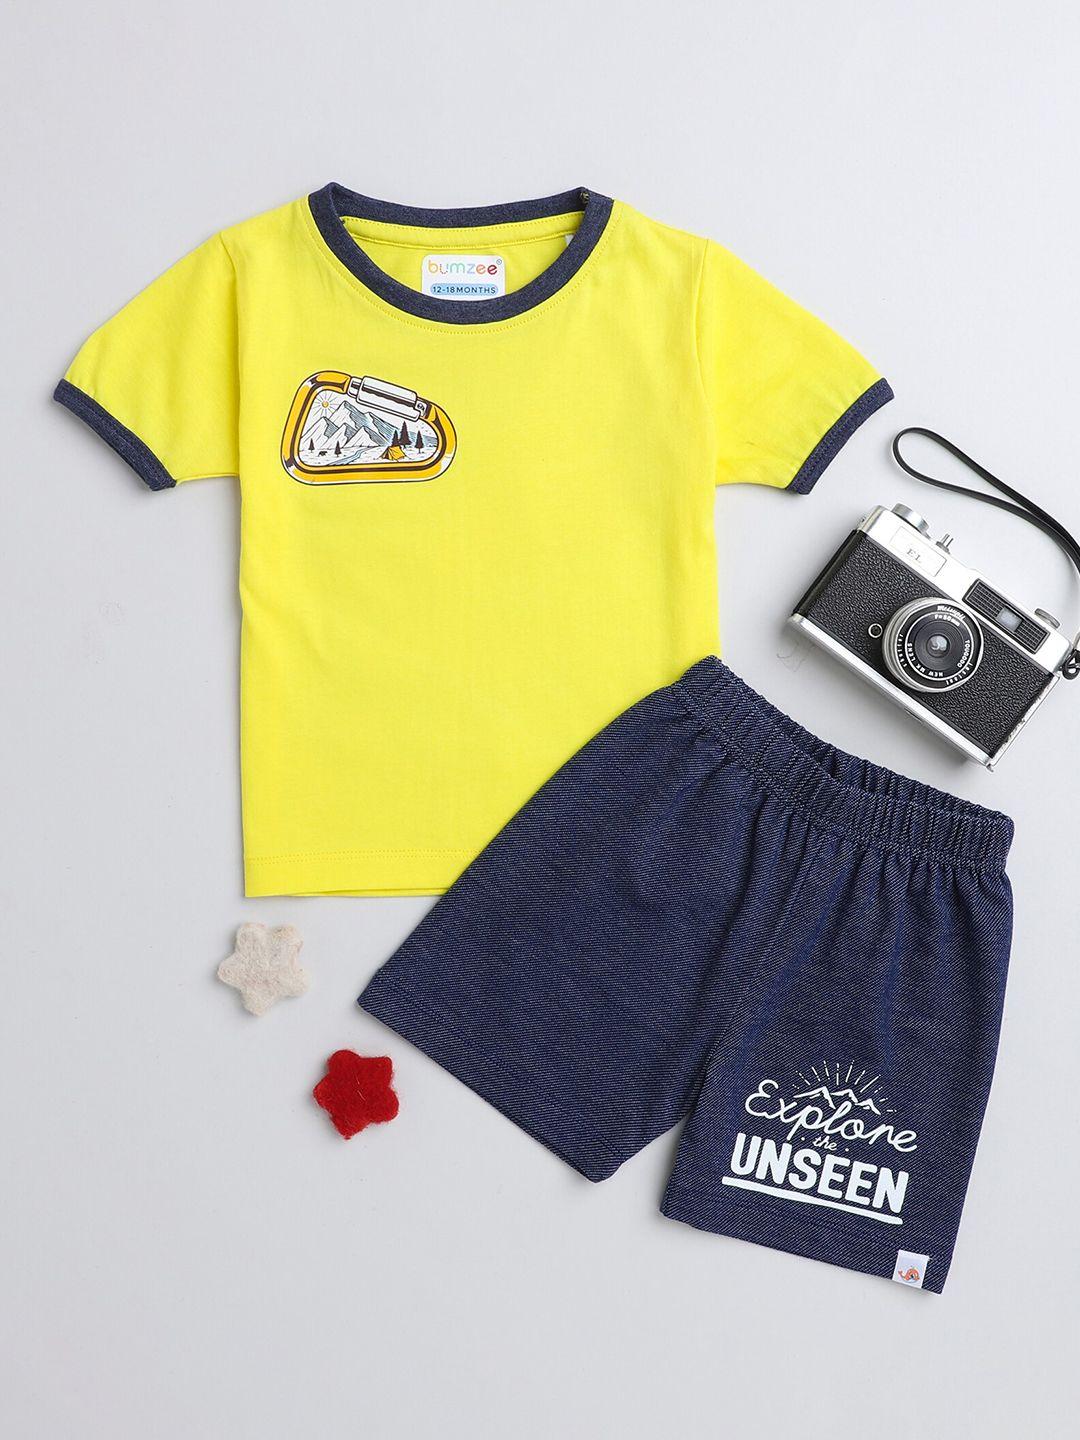 bumzee boys navy blue & white printed t-shirt with shorts